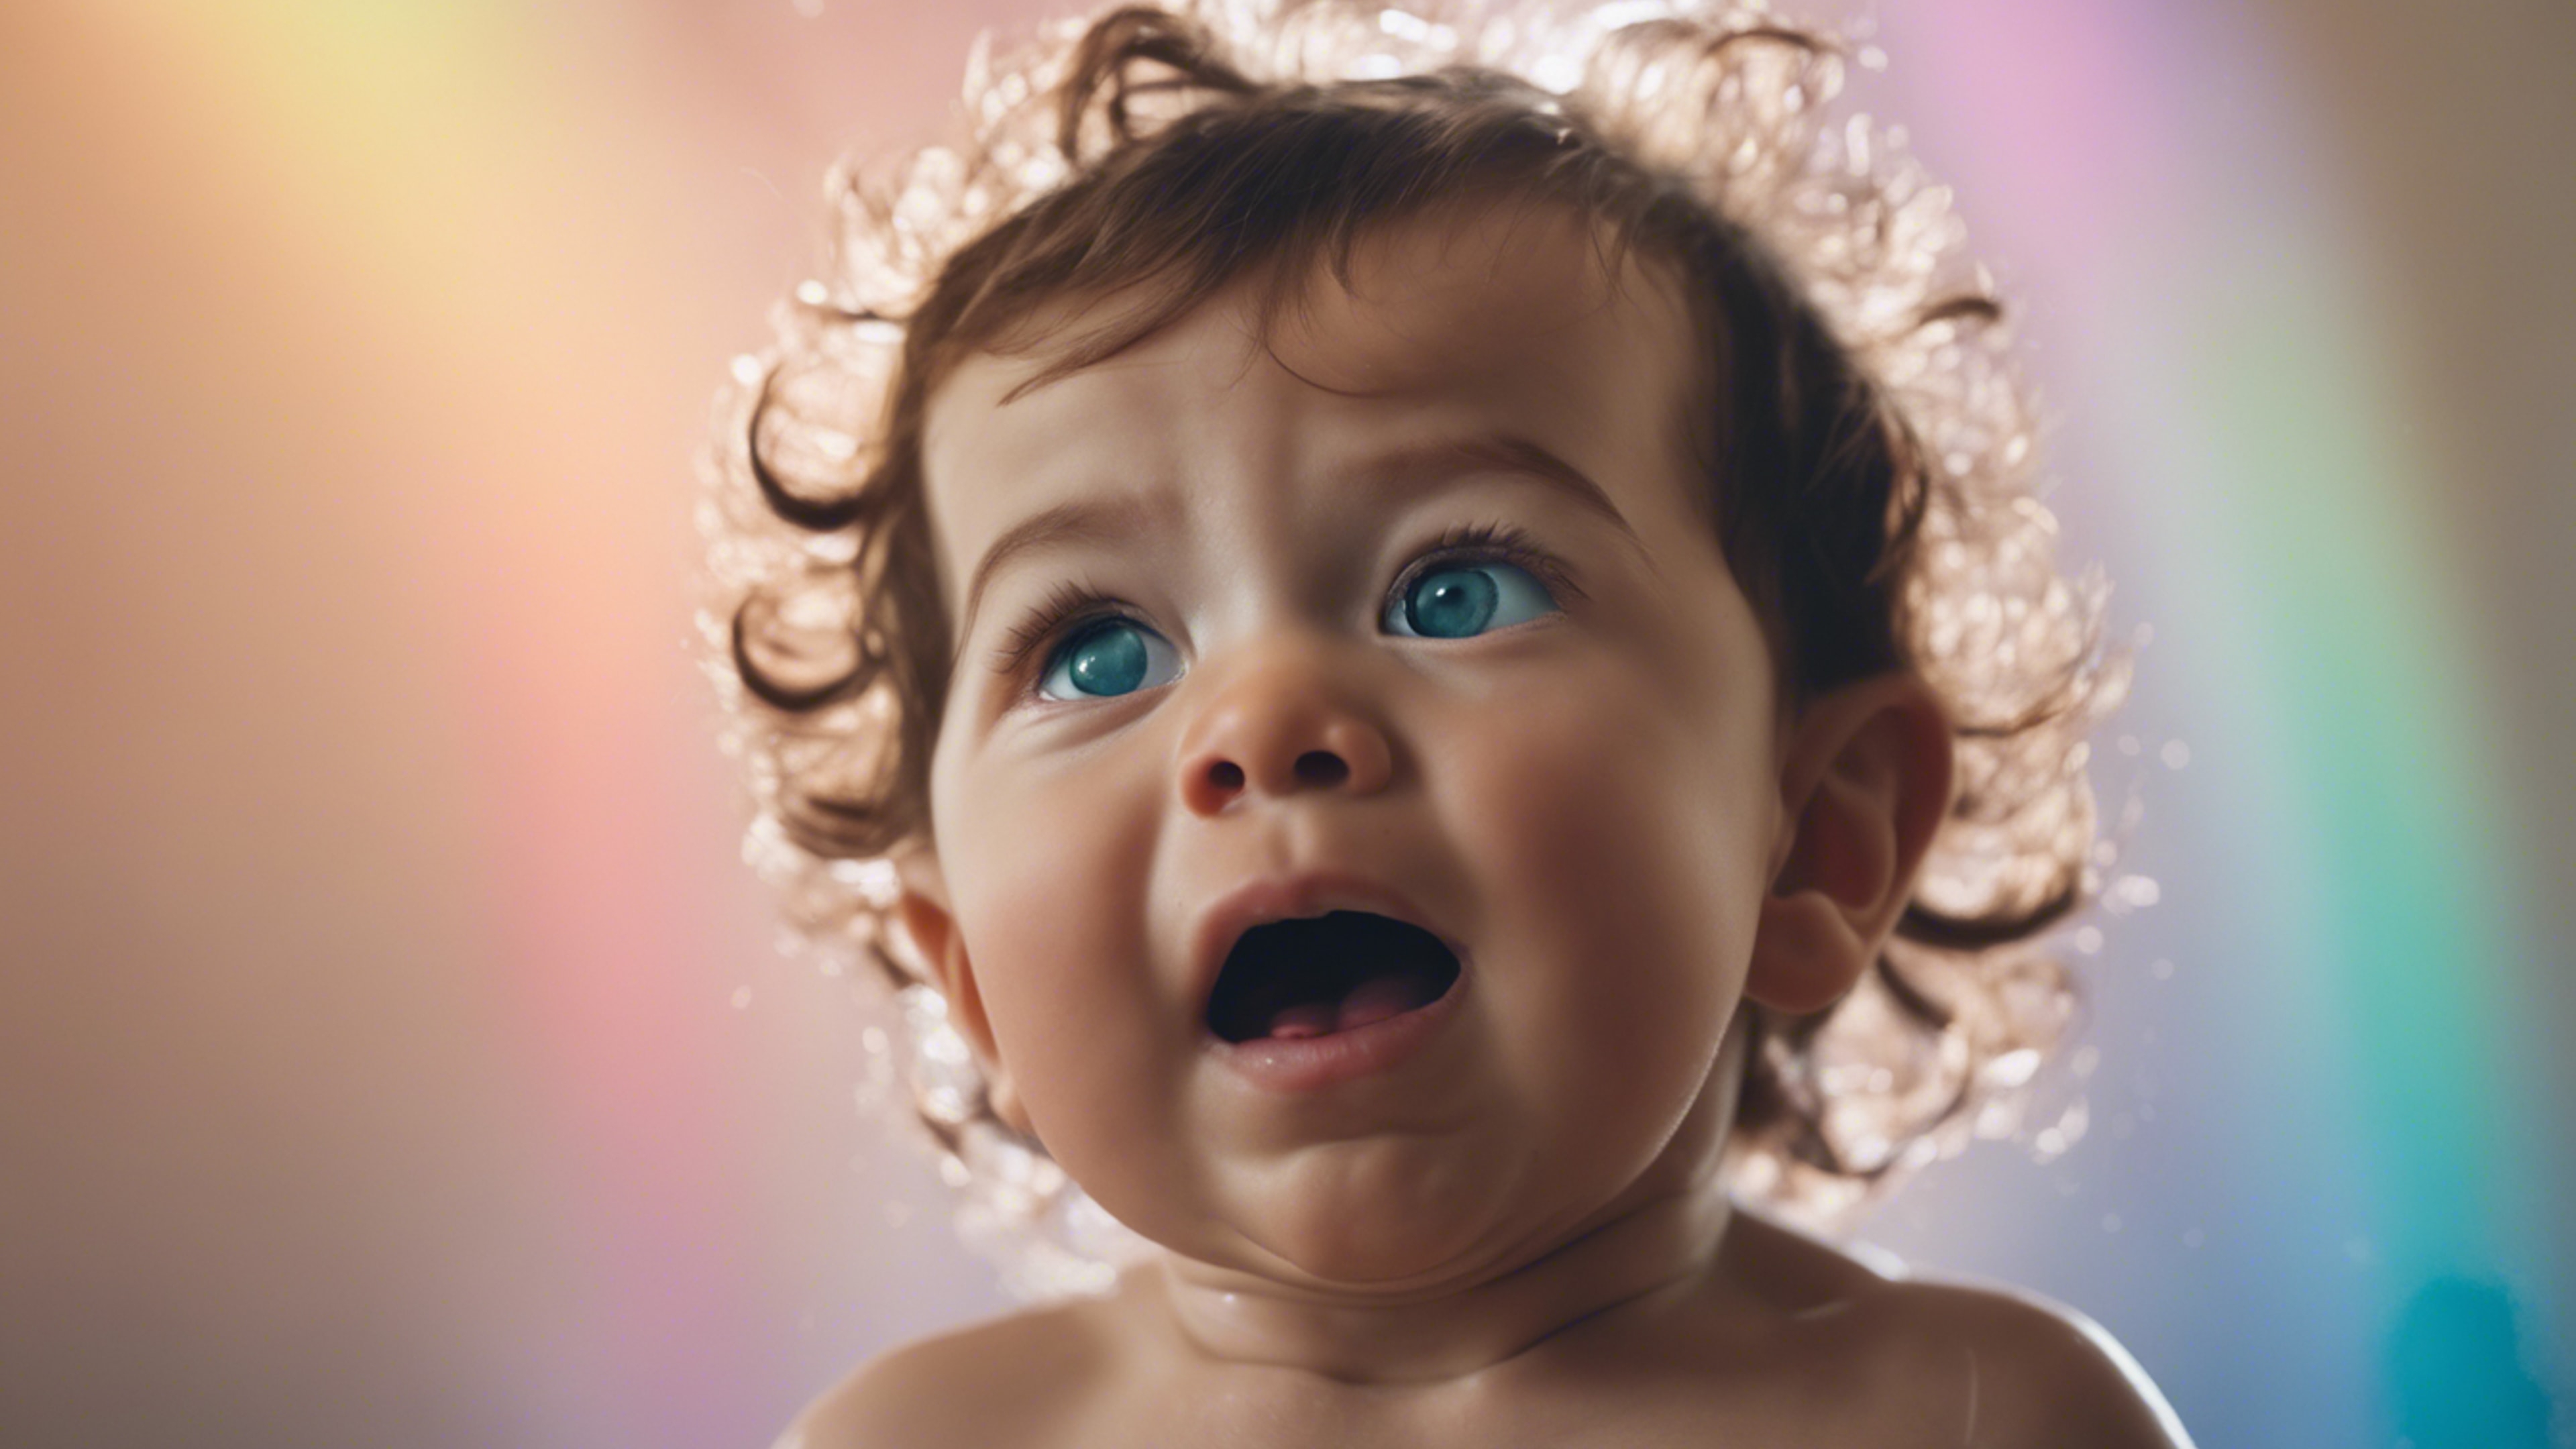 A baby with a surprised expression looking at a rainbow for the first time after a shower. Wallpaper[3ff3fcf0fe0d4ab0ad3a]